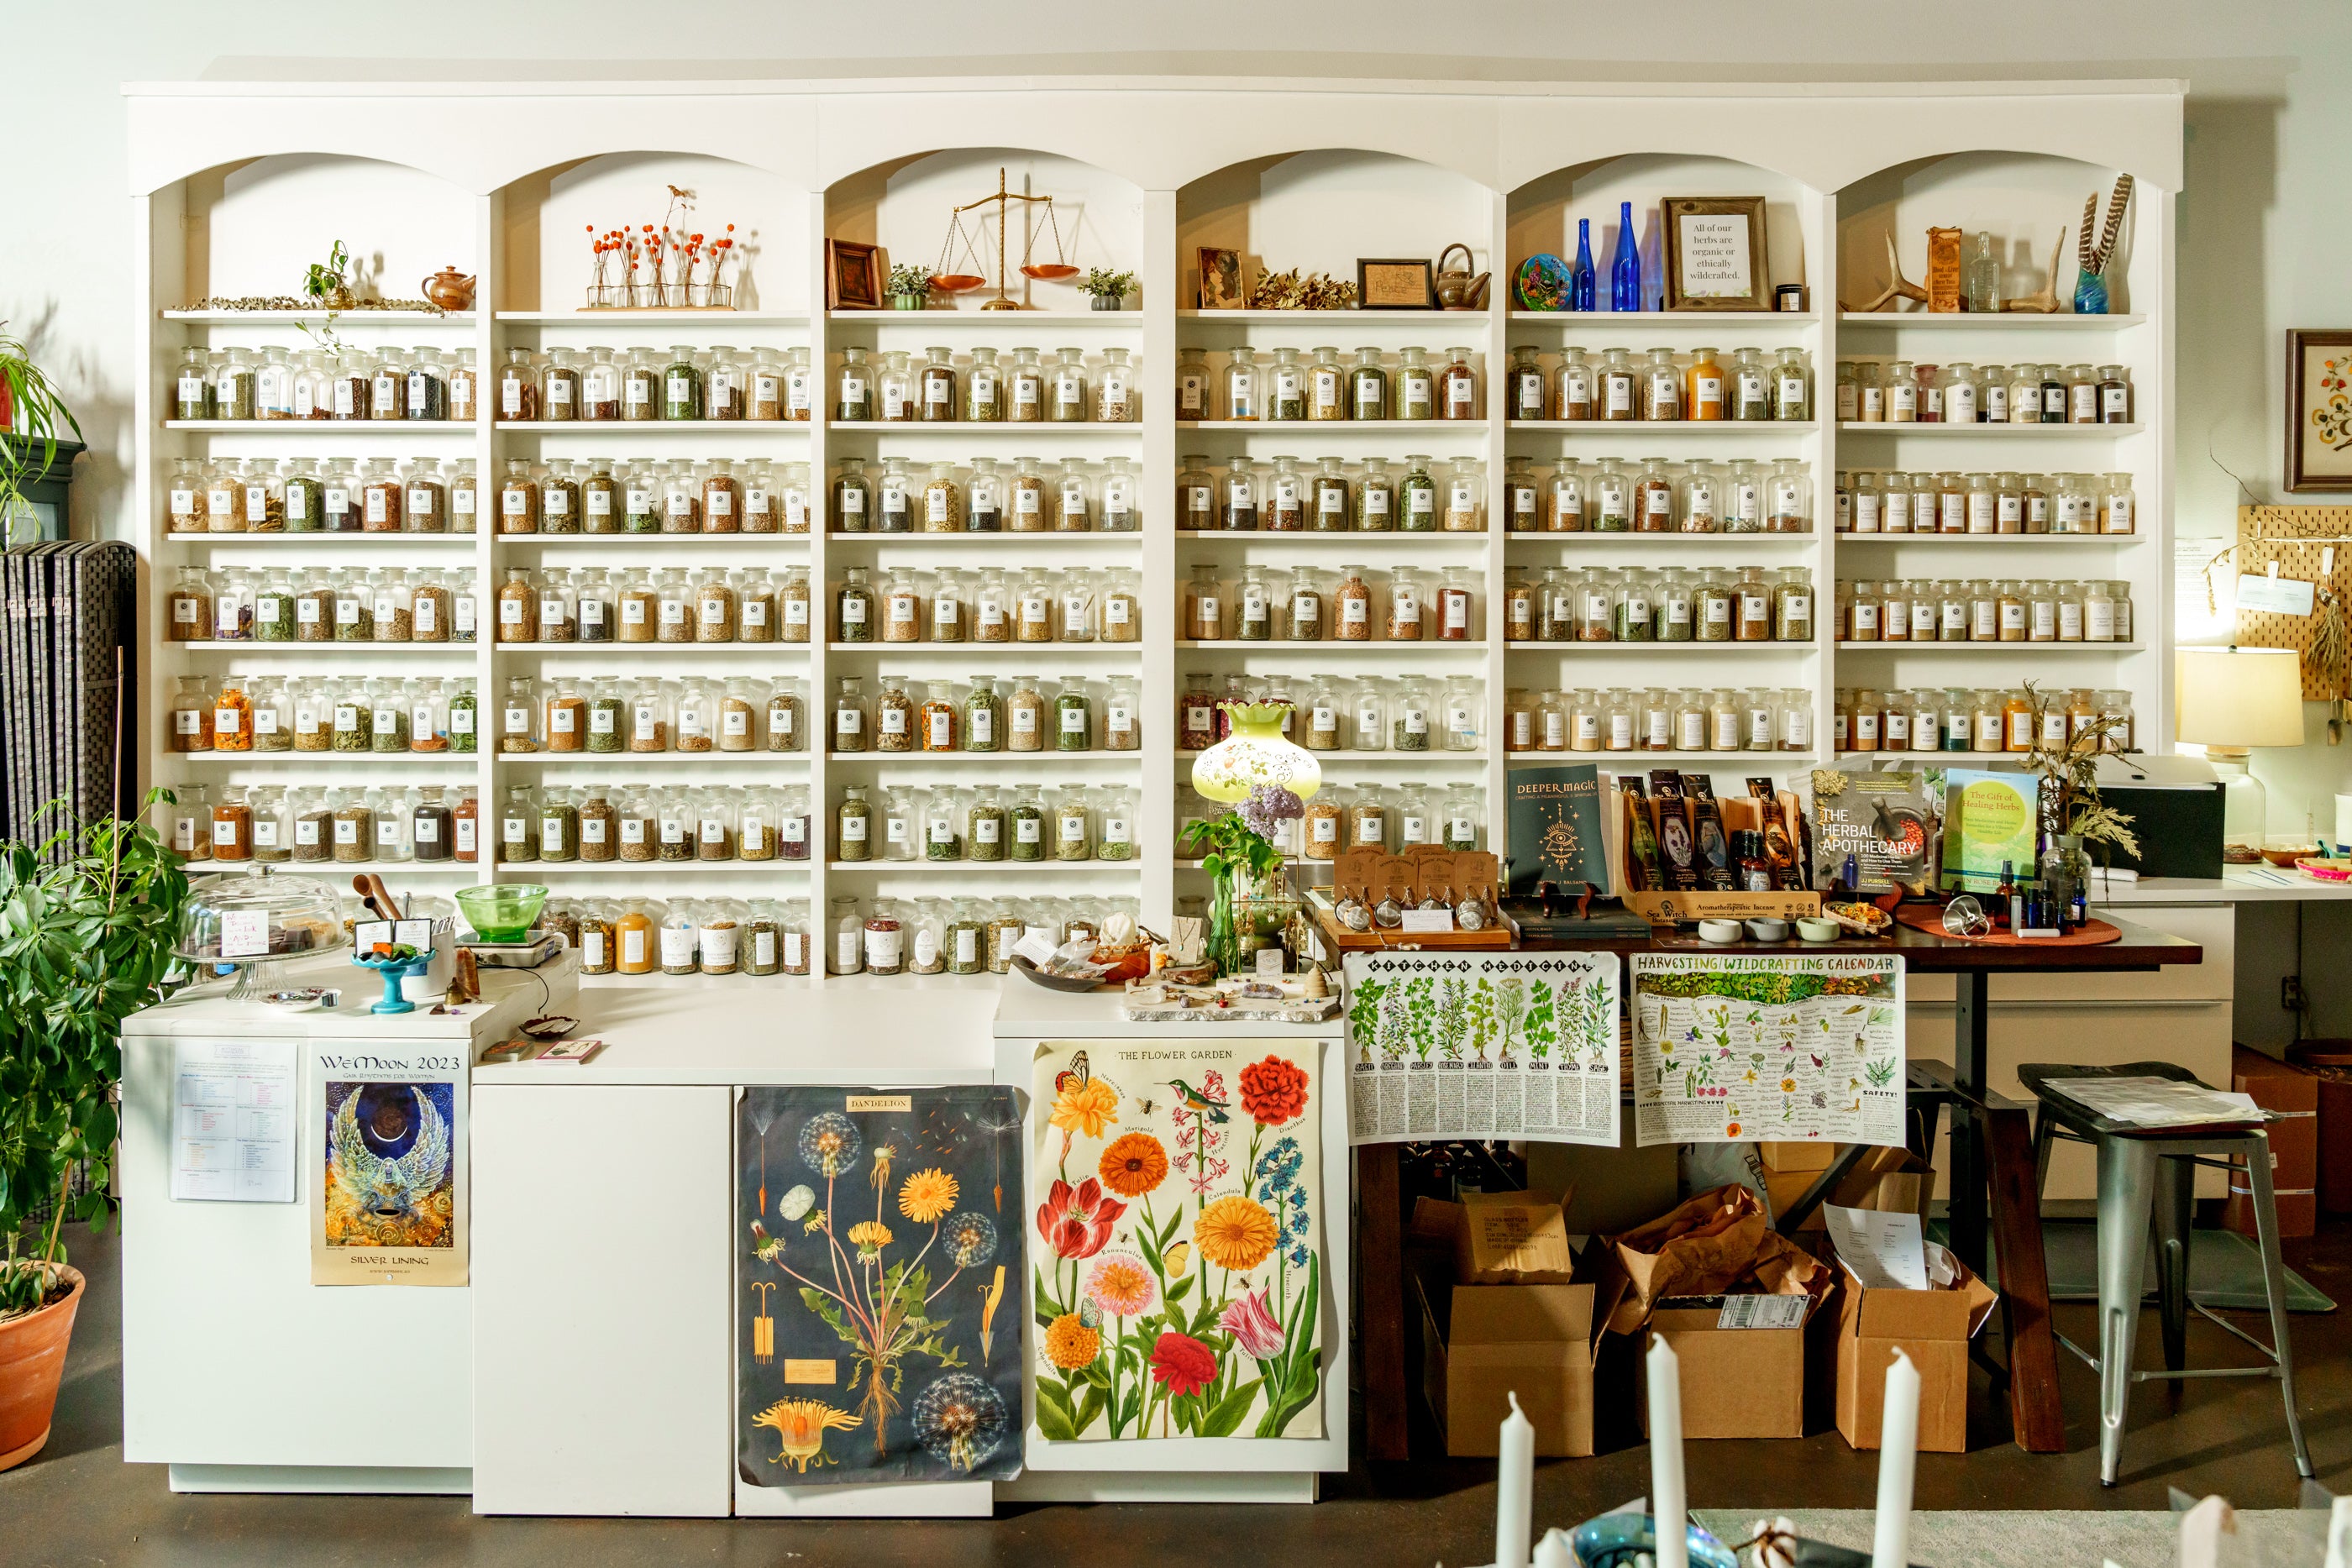 The Peoples Apothecary - Dr. Ashley Rieger, ND